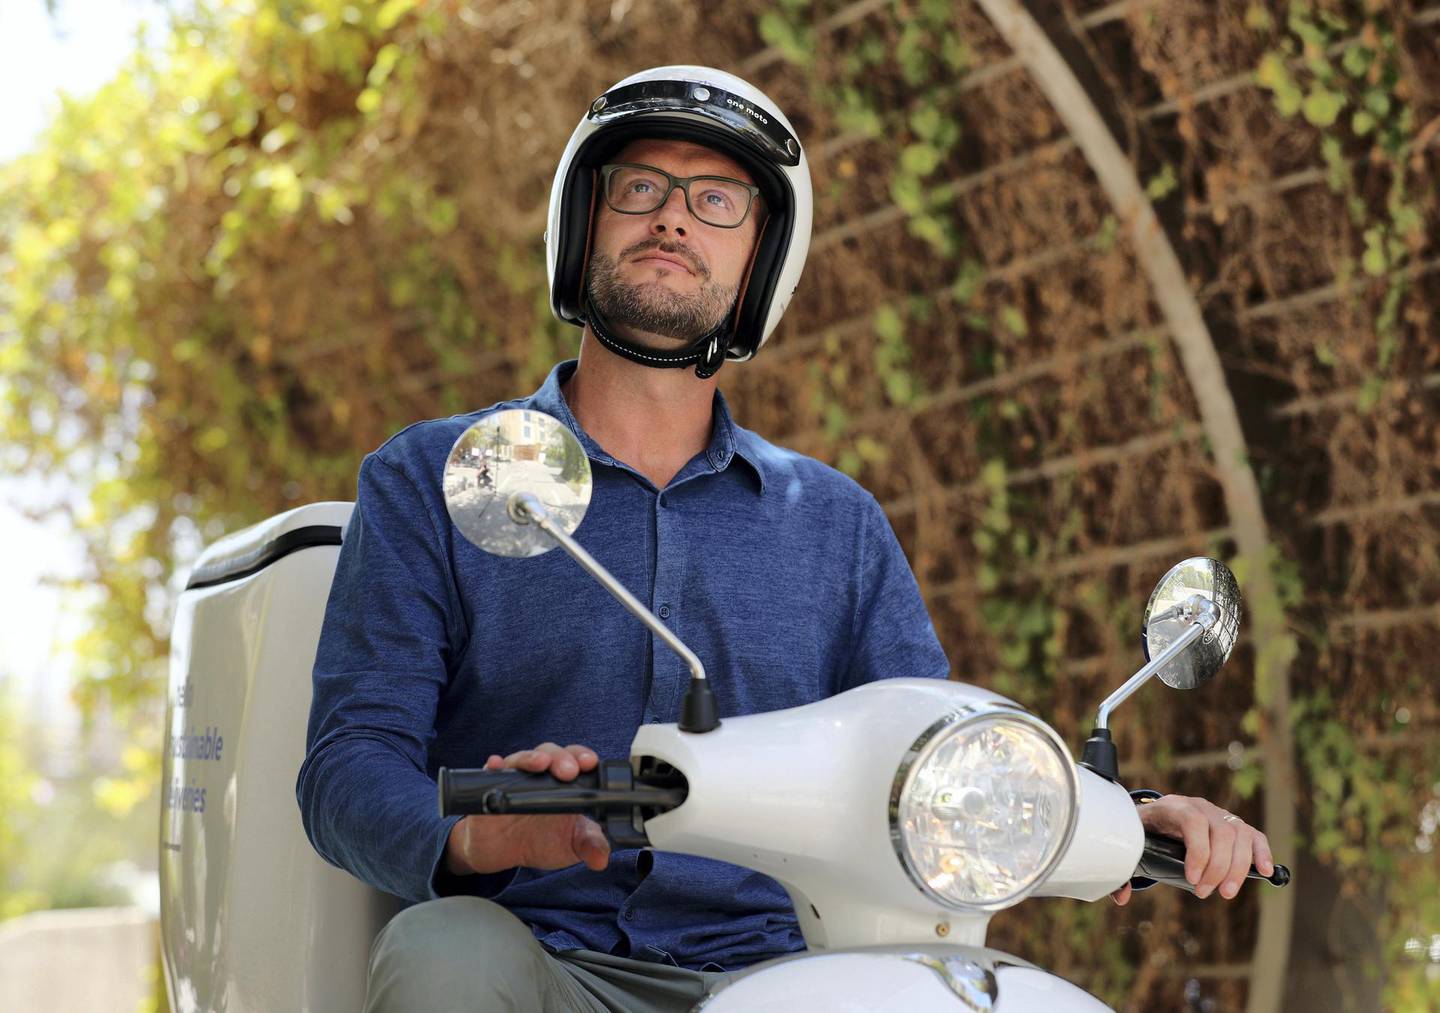 Dubai, United Arab Emirates - Reporter: Nick Webster. News. Adam Ridgeway delivers food on a moped for a week to see what life is like for delivery drivers, he’s trying to encourage use of electric scooters. Wednesday, April 7th, 2021. Dubai. Chris Whiteoak / The National